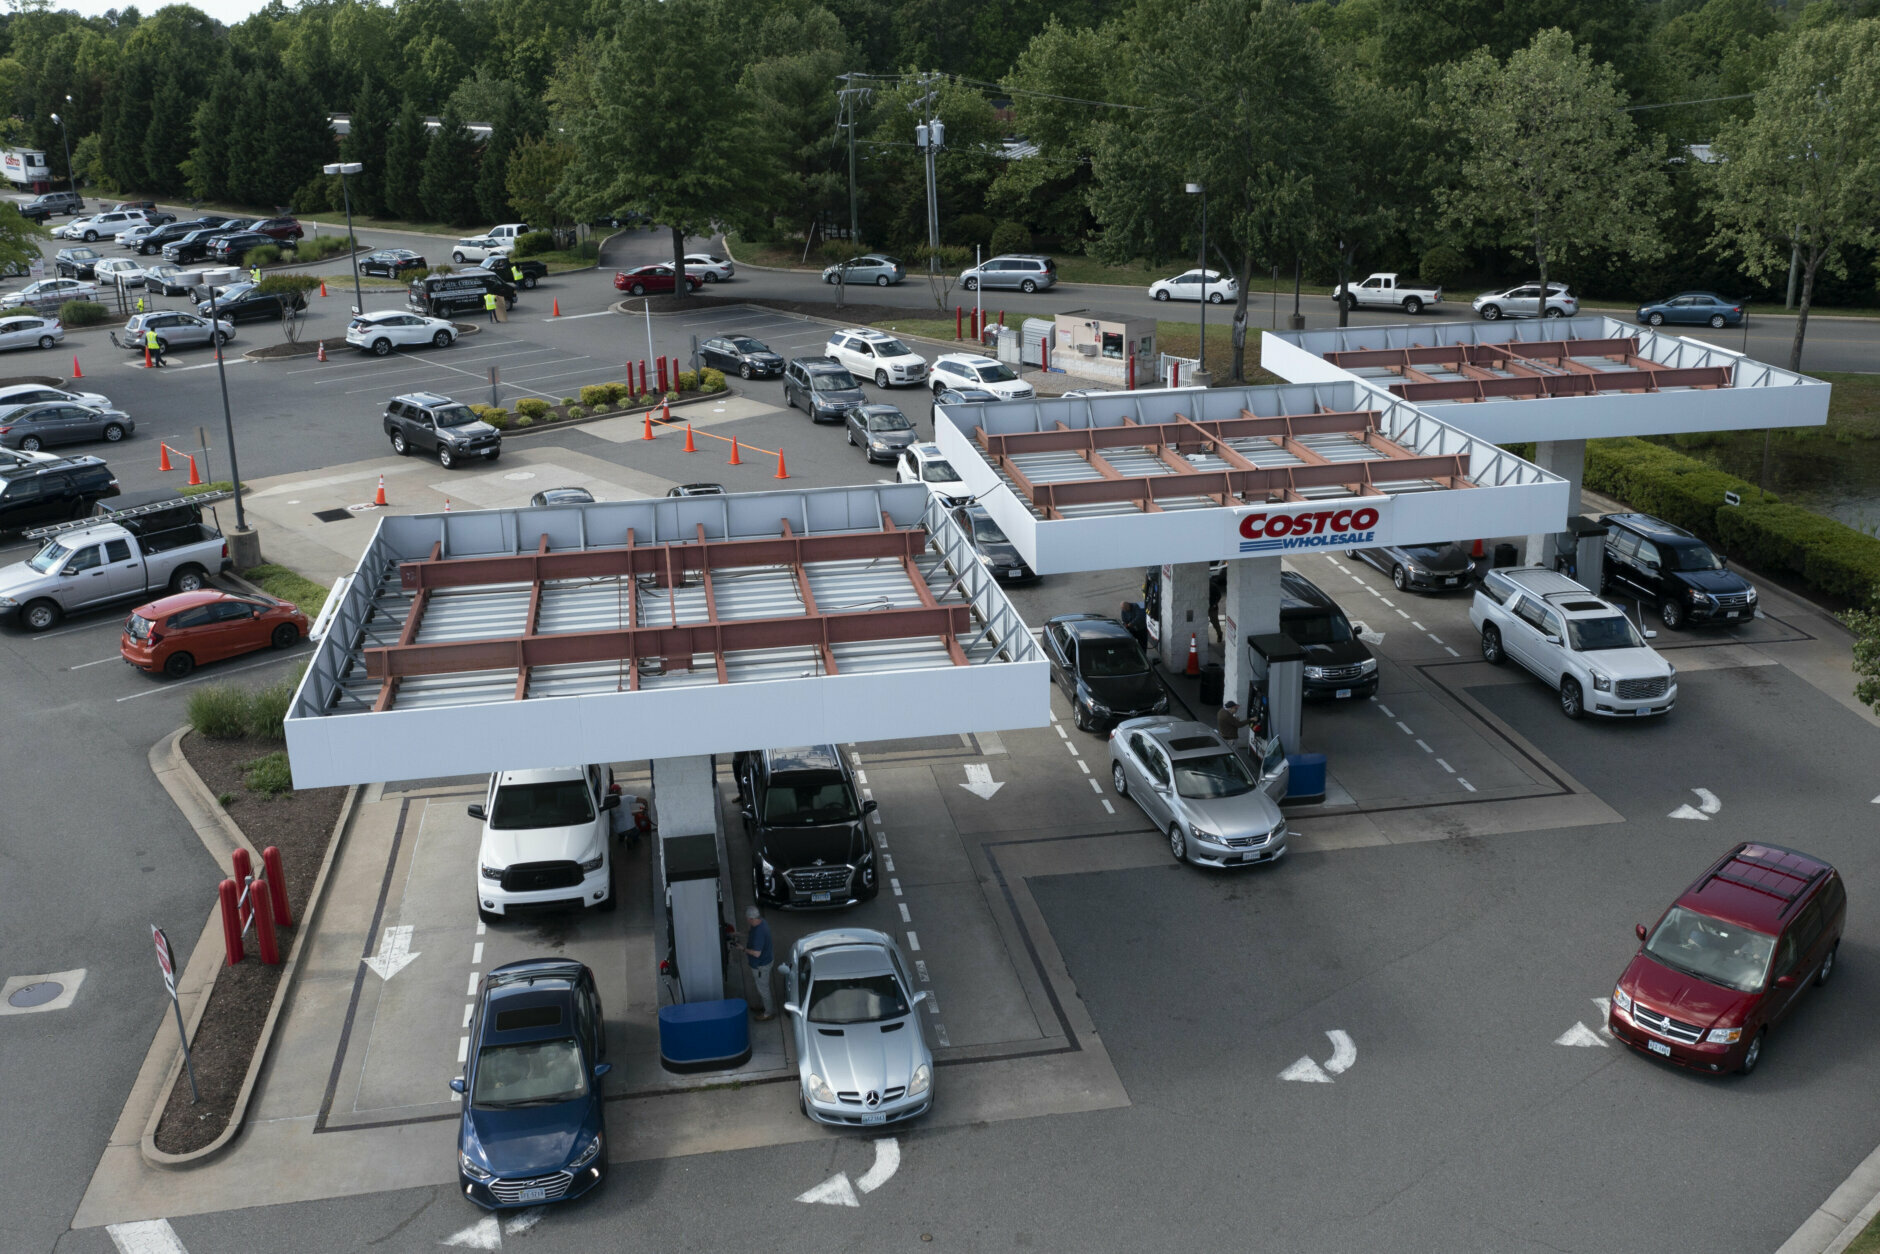 <p>Gas customers swarm a COSTCO gas station amid fears of a gas shortage in Richmond, Va., Tuesday, May 11, 2021. The line at the facility extended around the entire building.</p>
